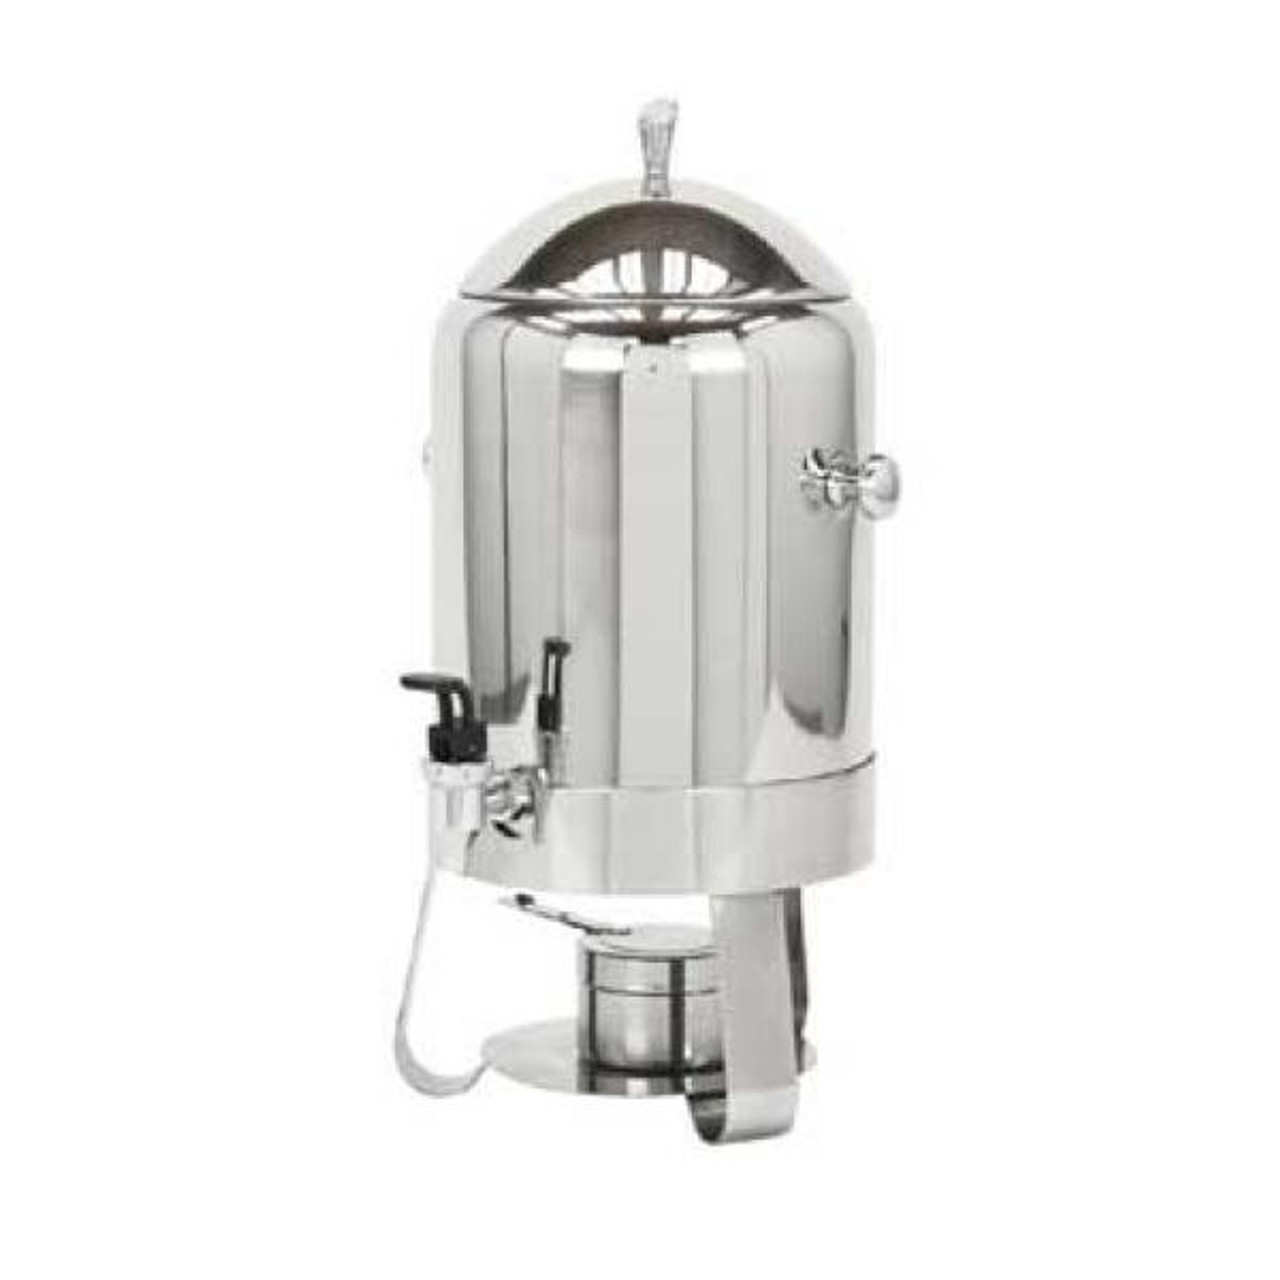 CECILWARE COFFEE / CHINESE HOT TEA URN 2 CHAMBERS 3 SPIGOTS - NO [16781] -  $895.00 : A-Z Restaurant Equipment, Buy - Sell - Trade